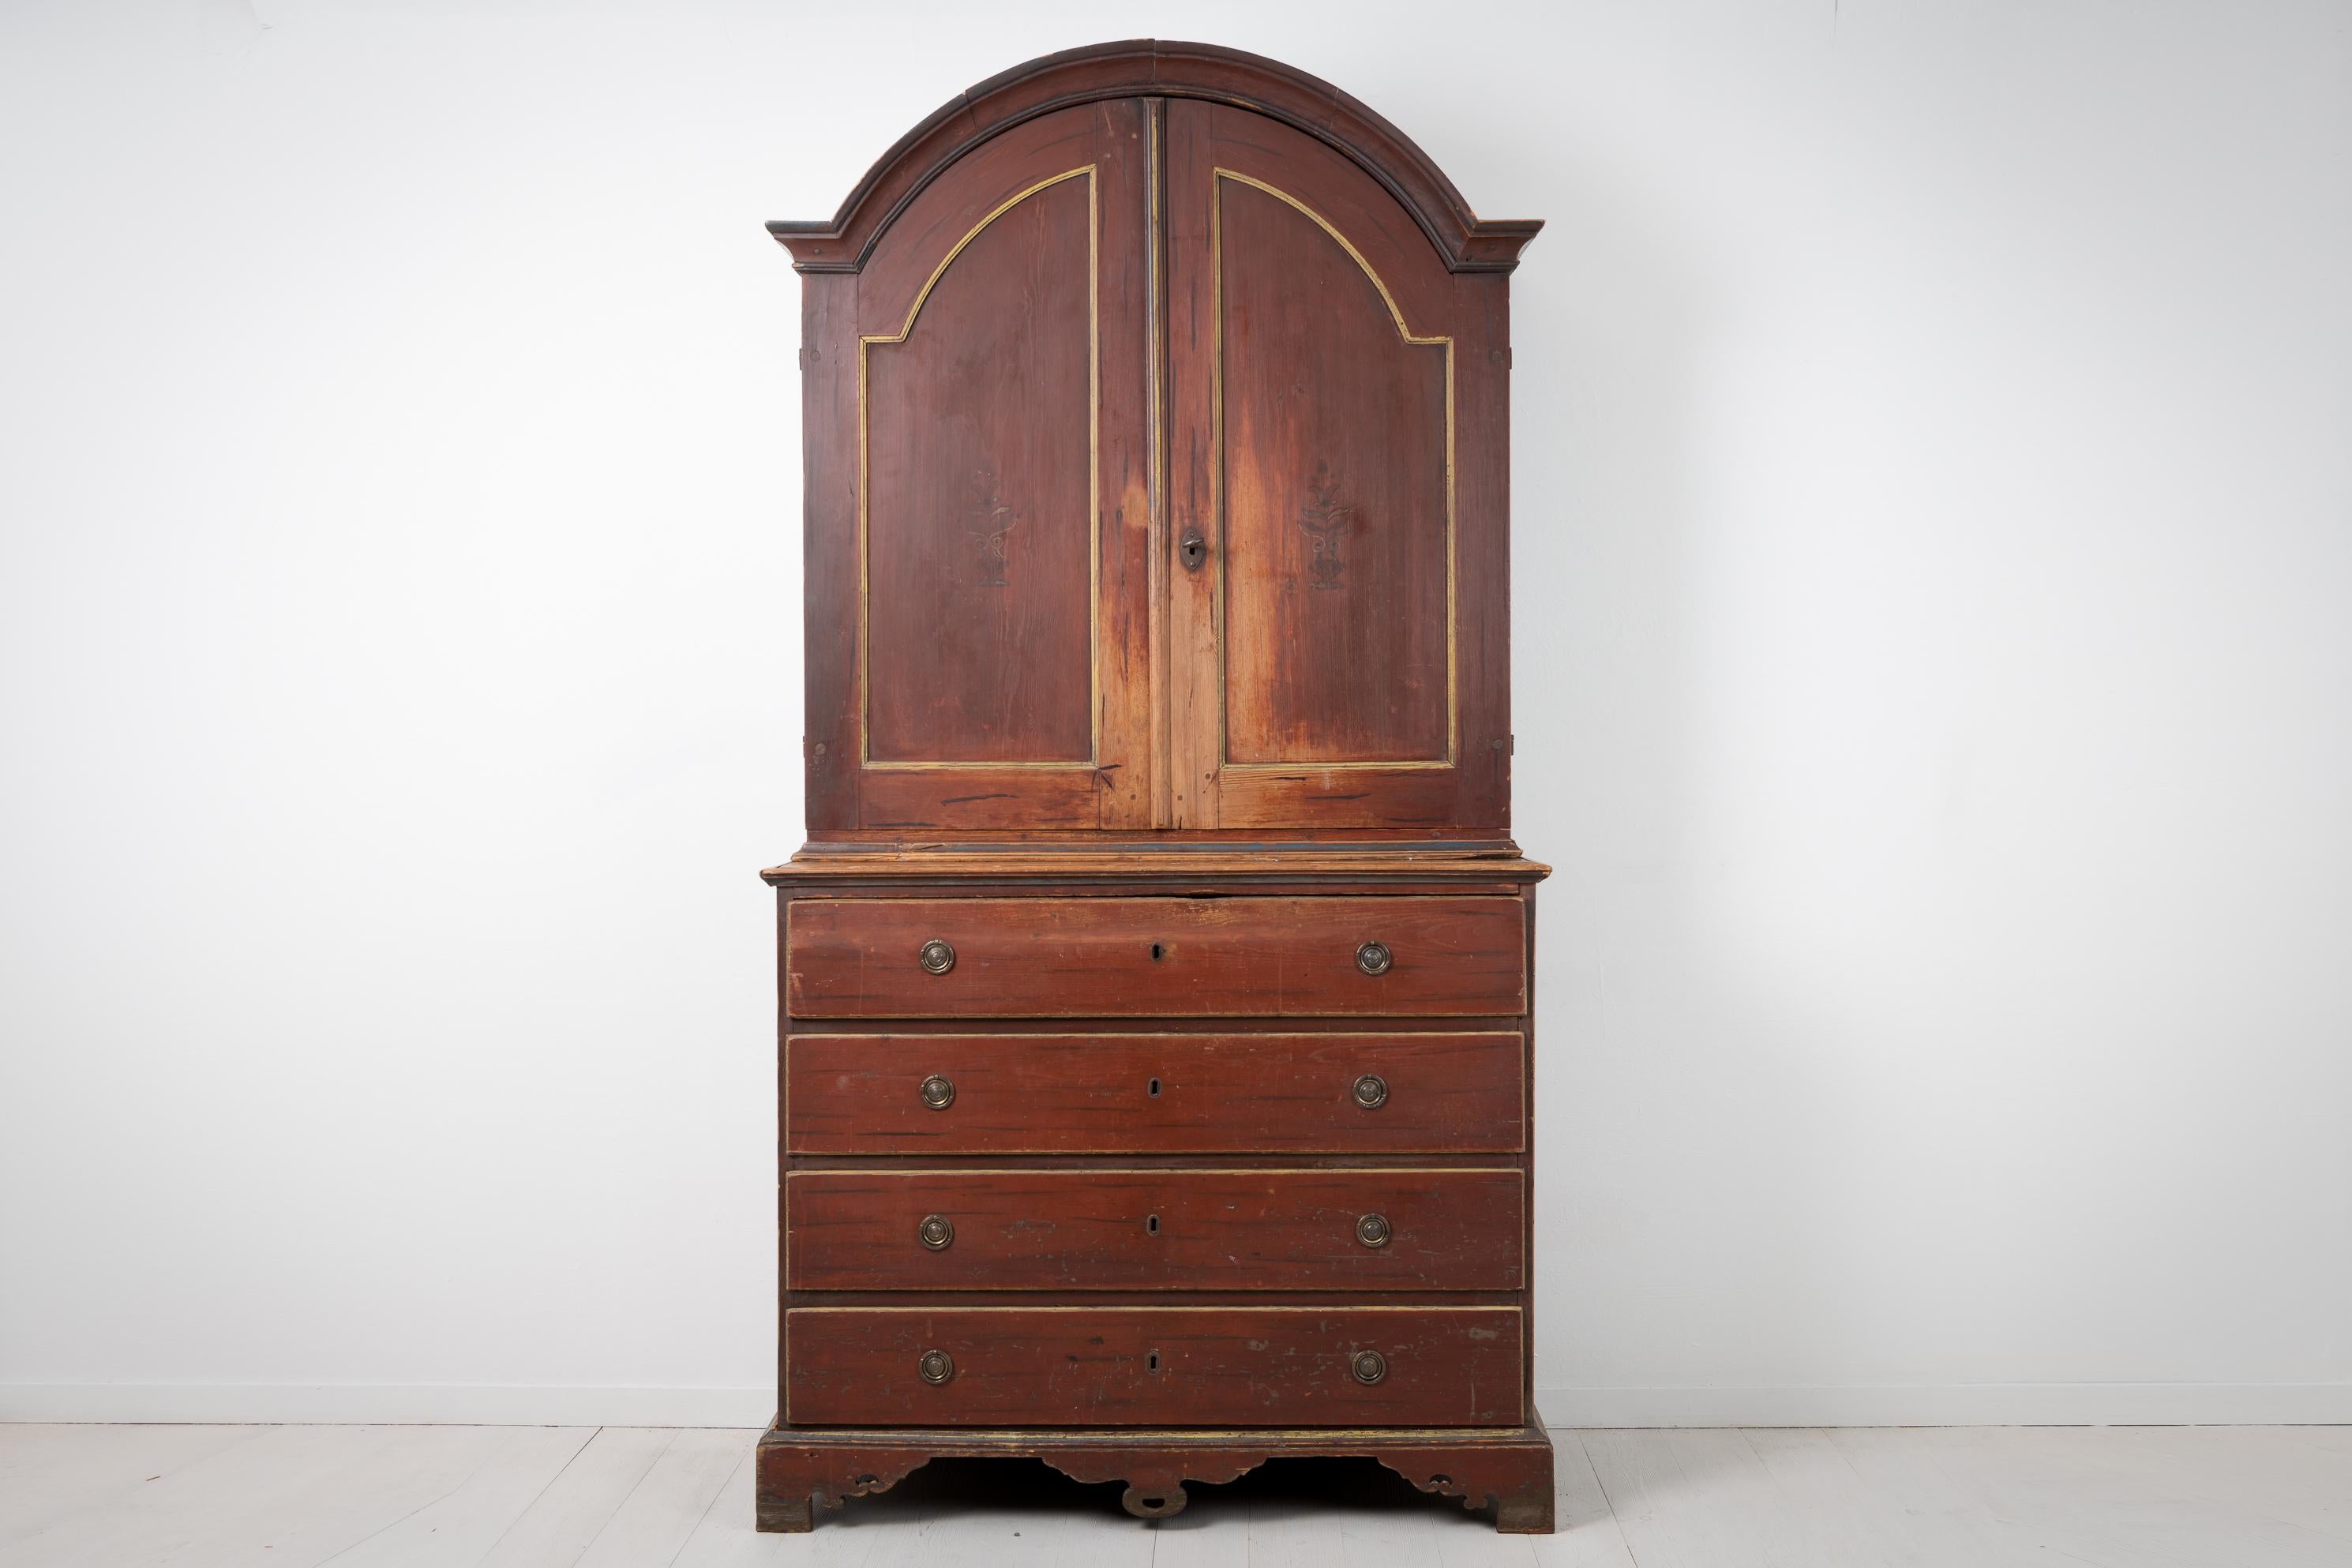 Swedish Rococo cabinet from the late 1700s. The cabinet is painted pine and the paint is the untouched original first paint from the late 1700s. The deep paint combined with a genuine 250 year old patina gives the cabinet a genuine warmth and